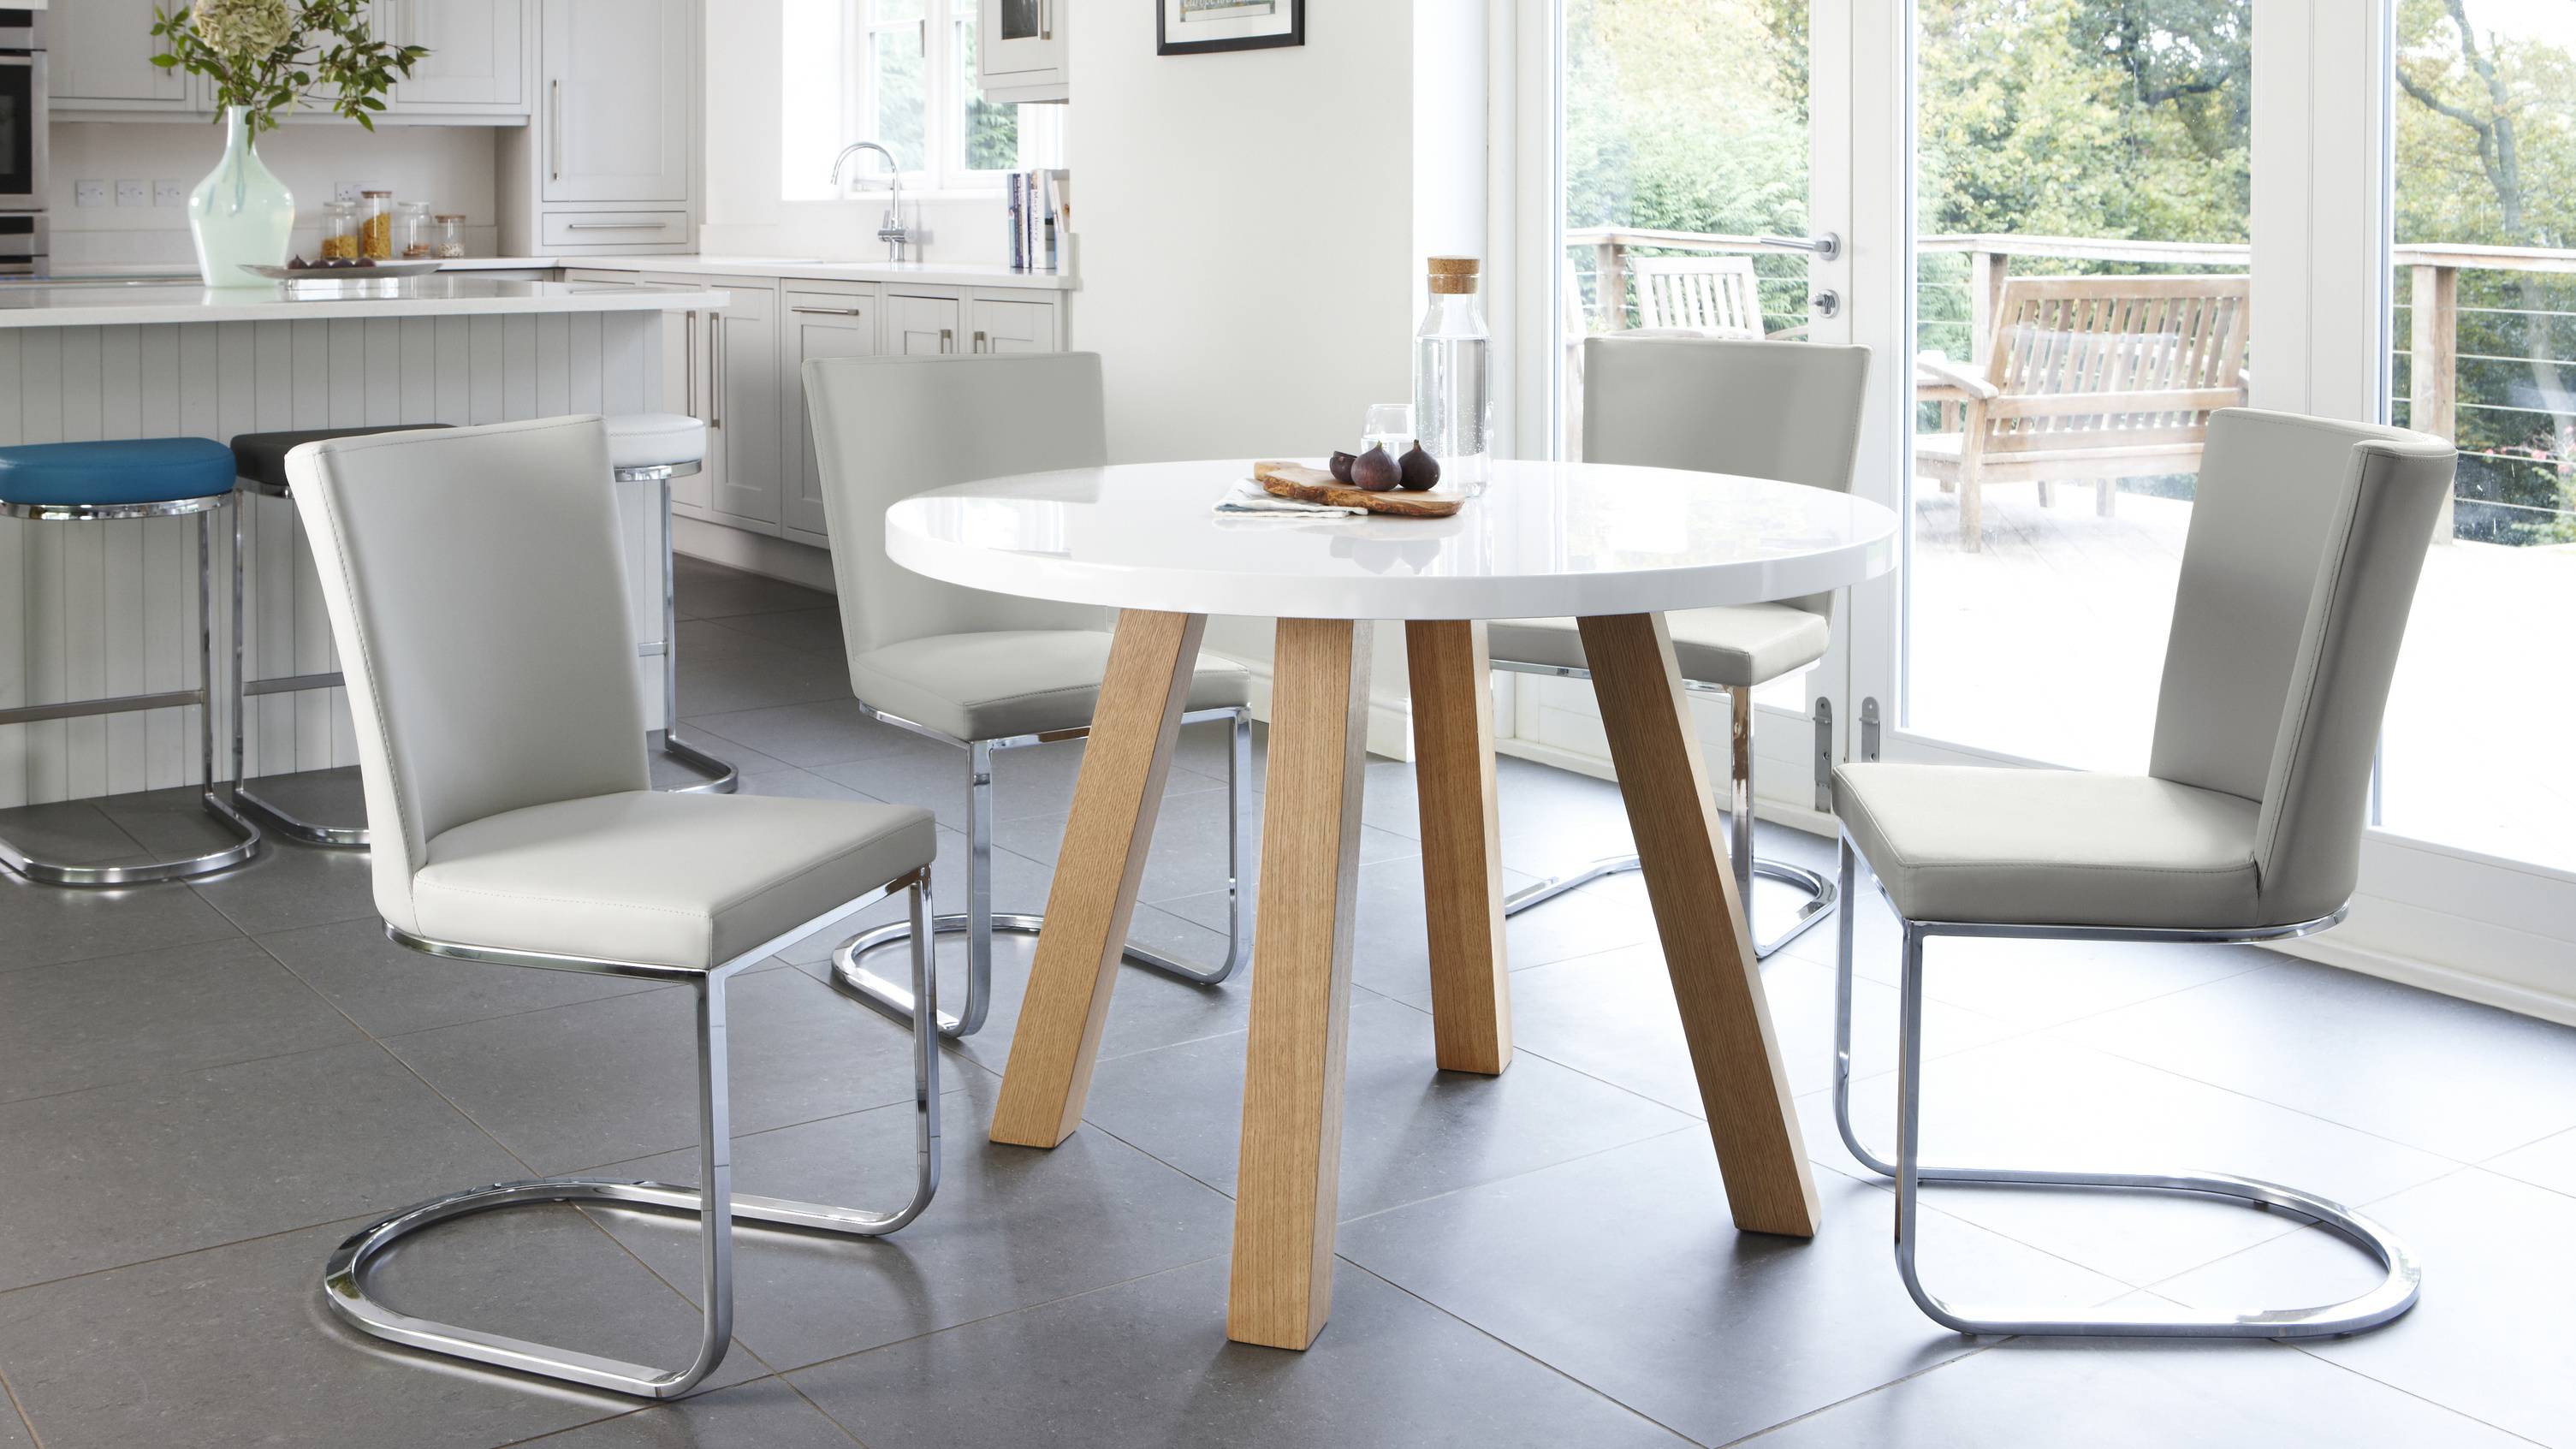 4 Seater White Gloss and Oak Dining Table Exclusively Danetti Julia Kendell Range